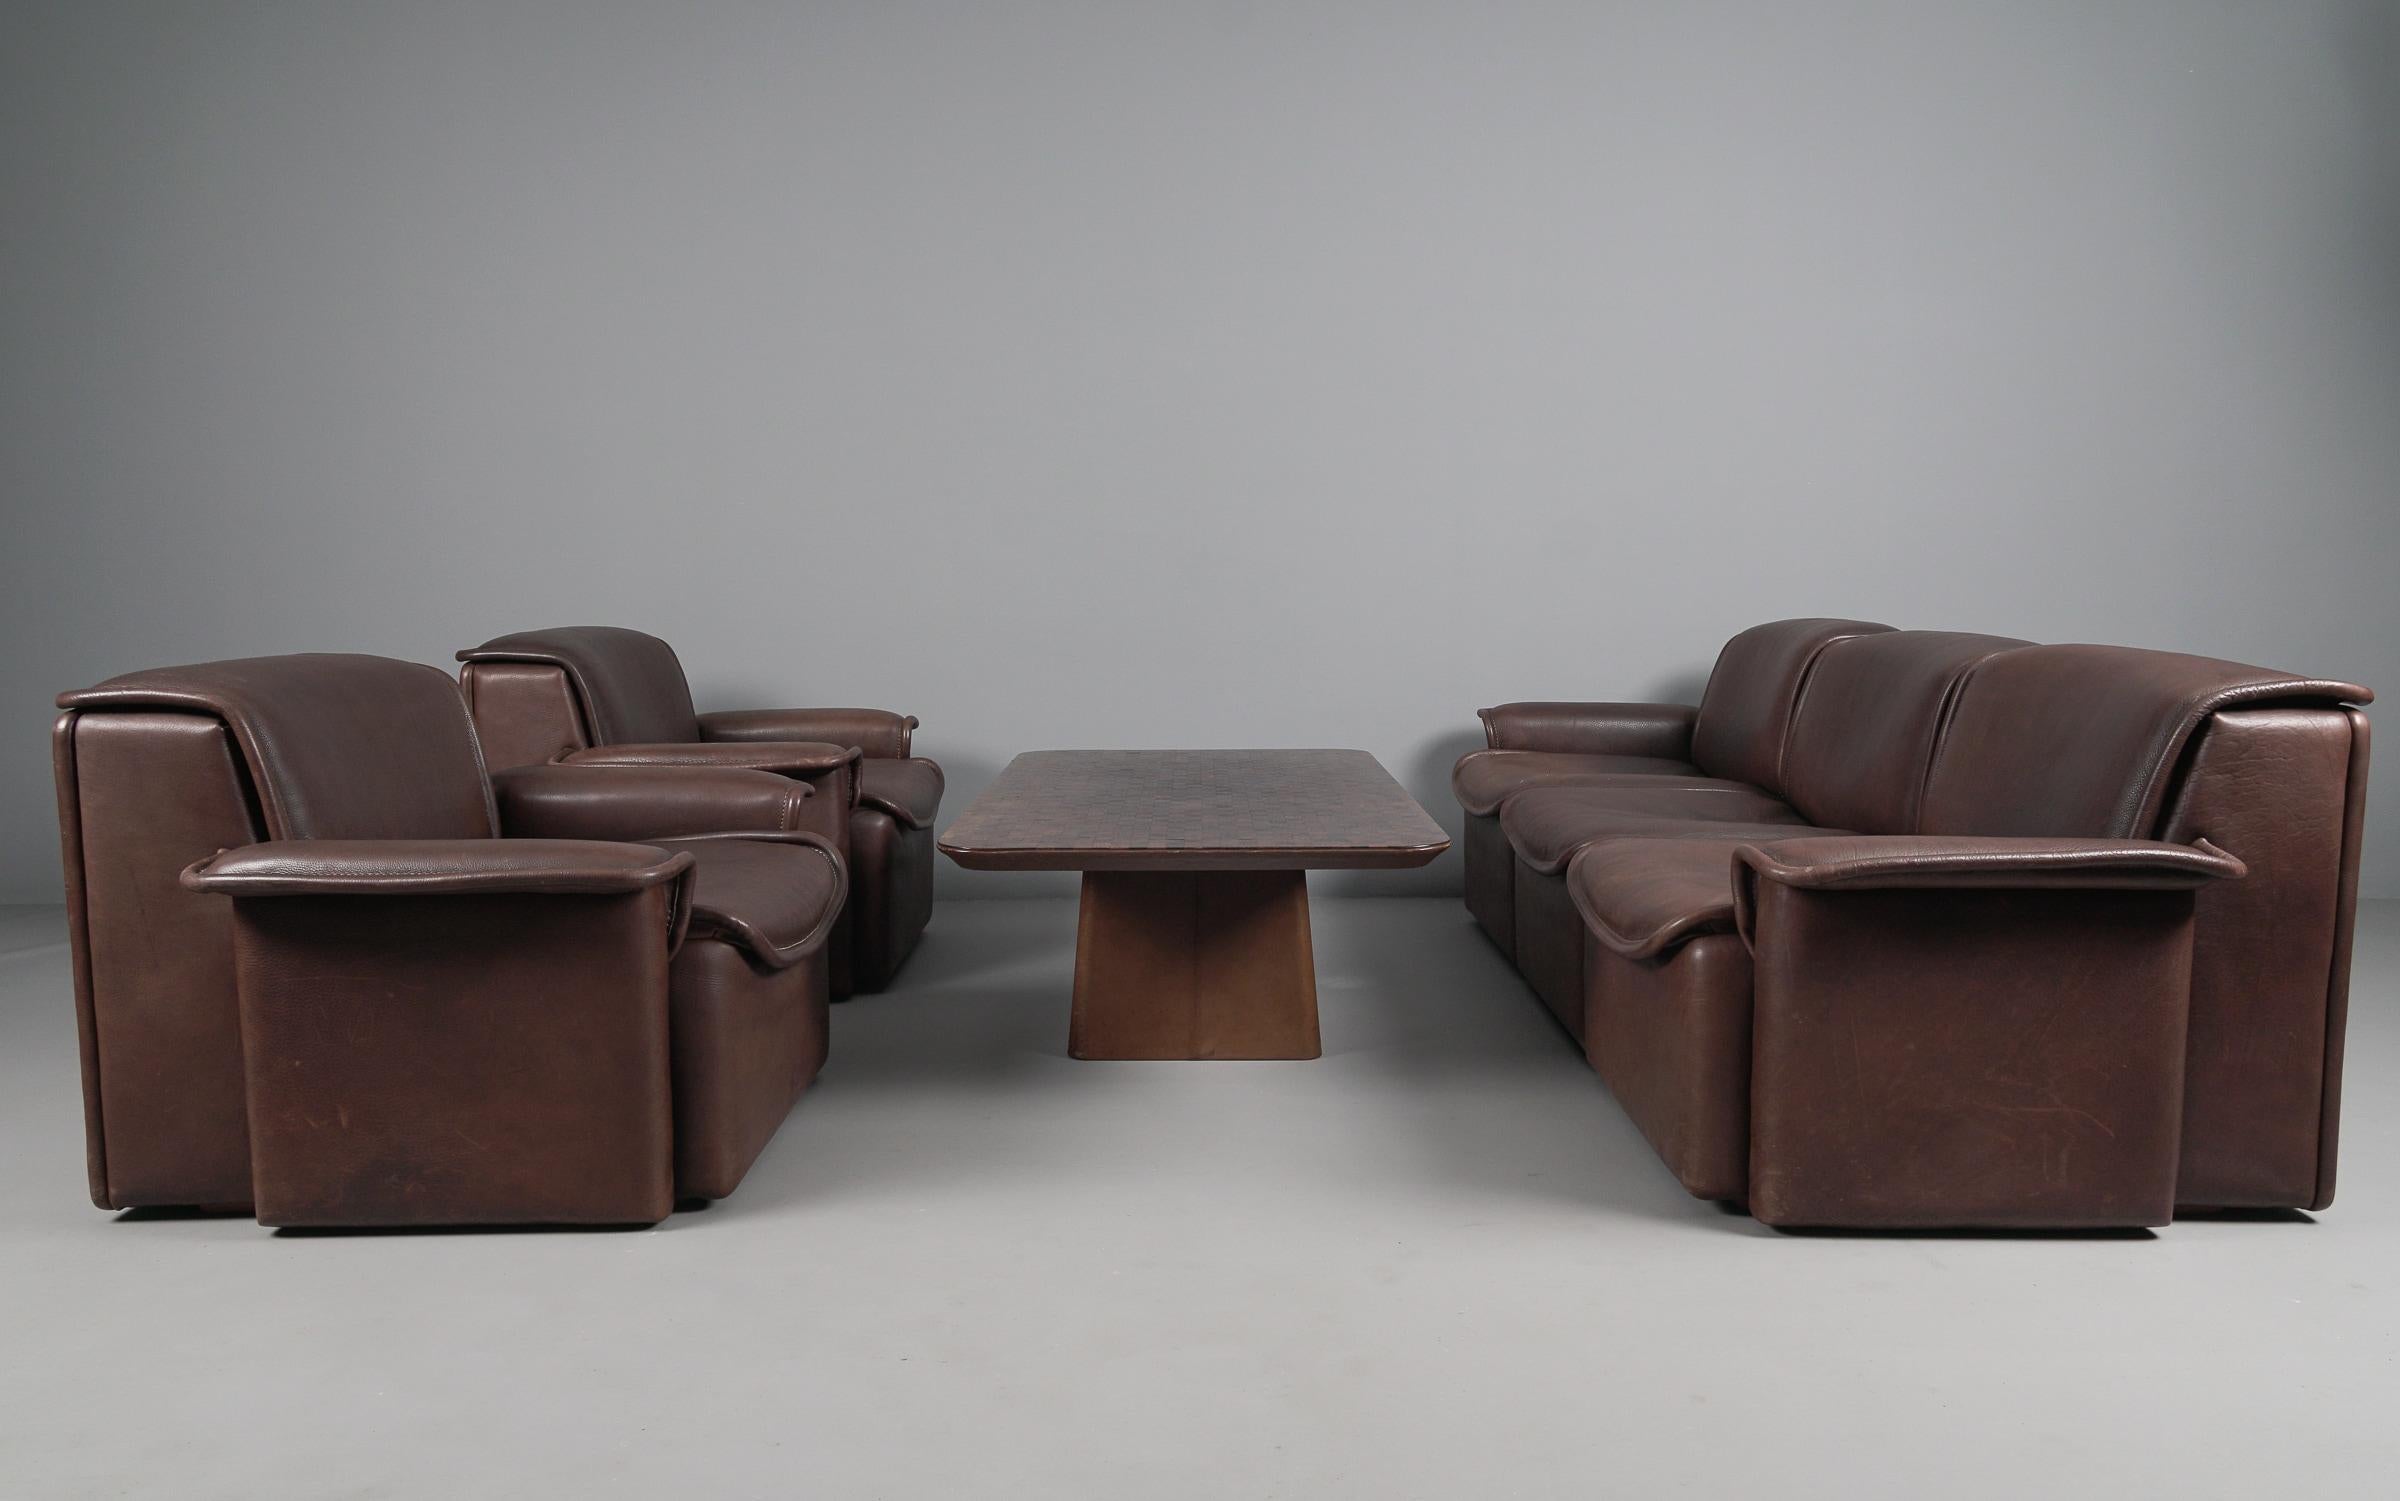 Two Armchairs by De Sede DS-12 in Brown Neck Leather, 1960s, Switzerland For Sale 7